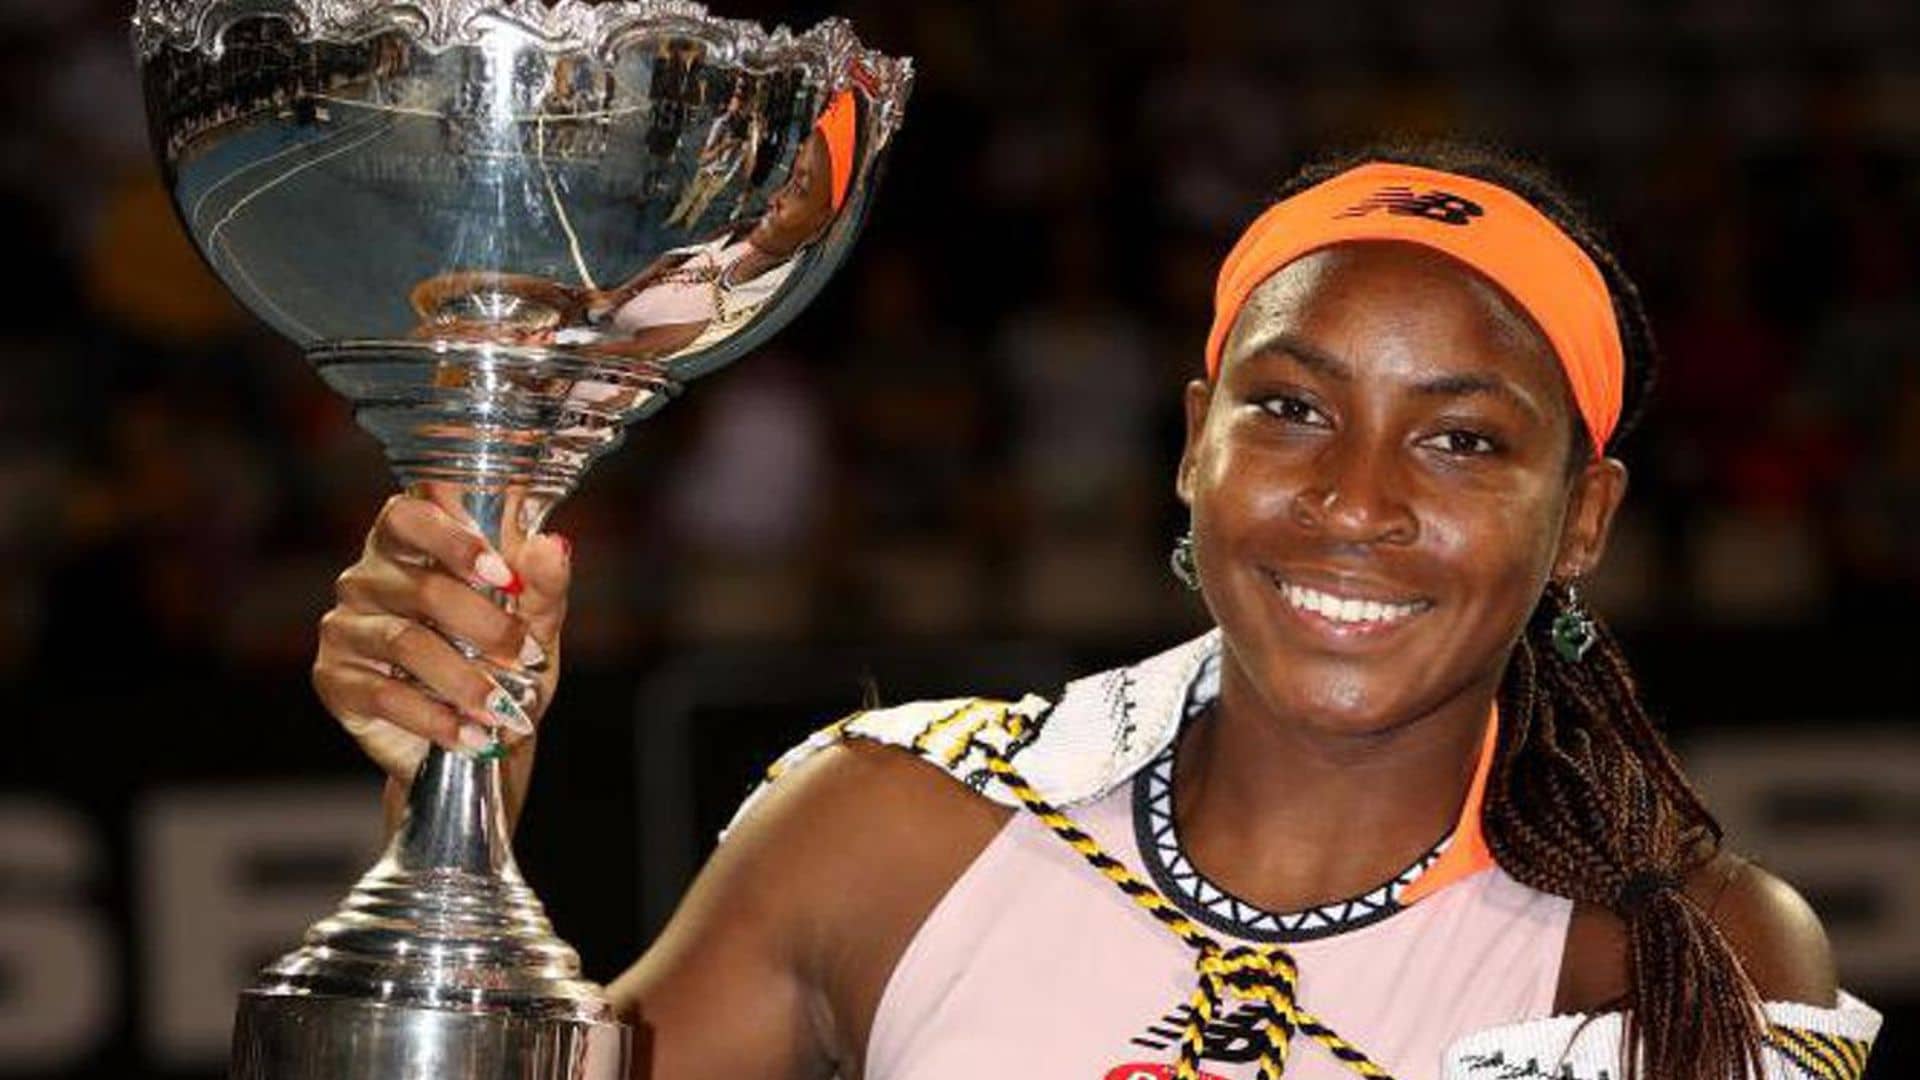 Coco Gauff enjoys herself on Christmas Eve before defending WTA title in New Zealand